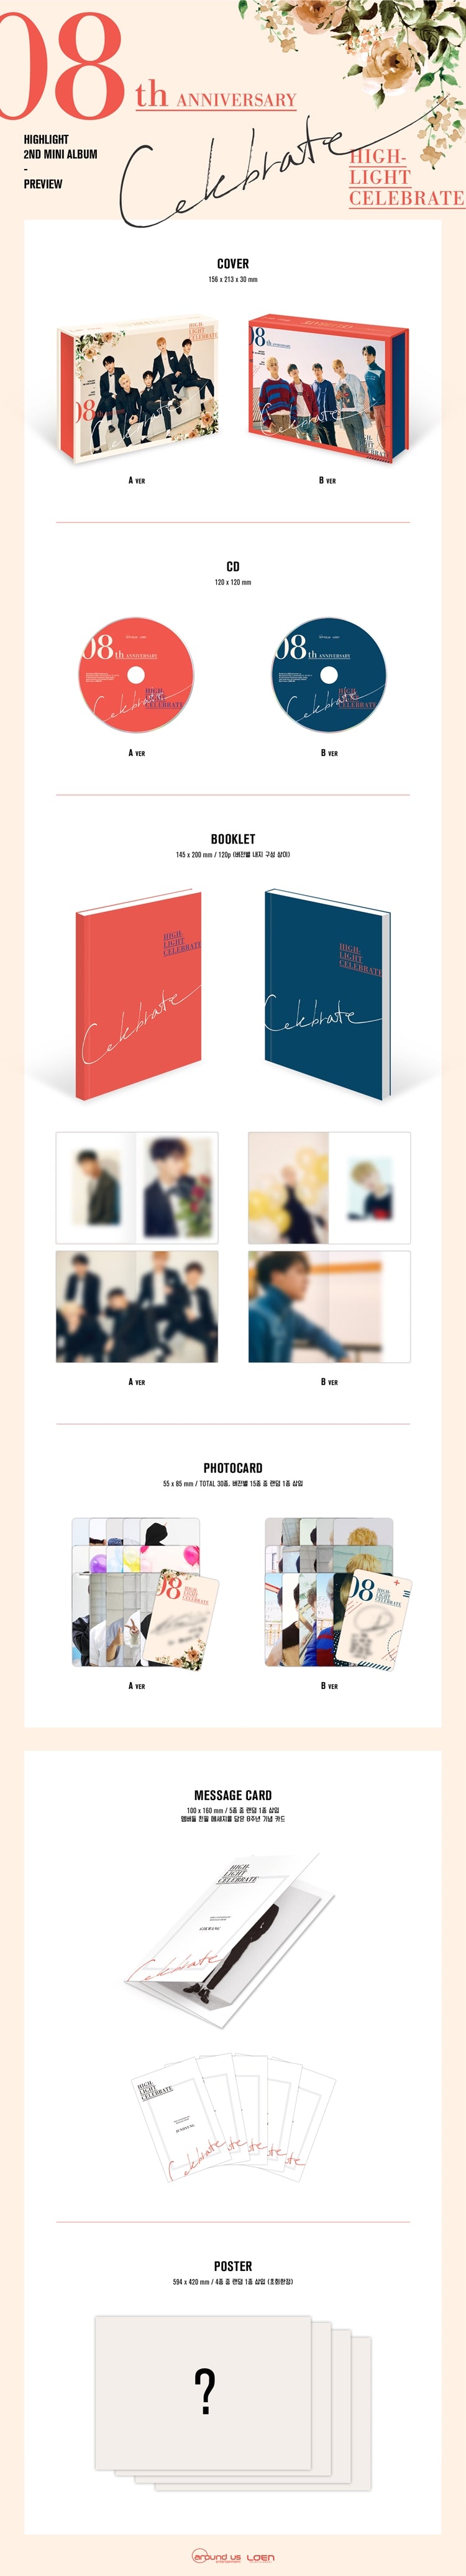 1 CD
1 Booklet
1 Photo Card
1 Message Card